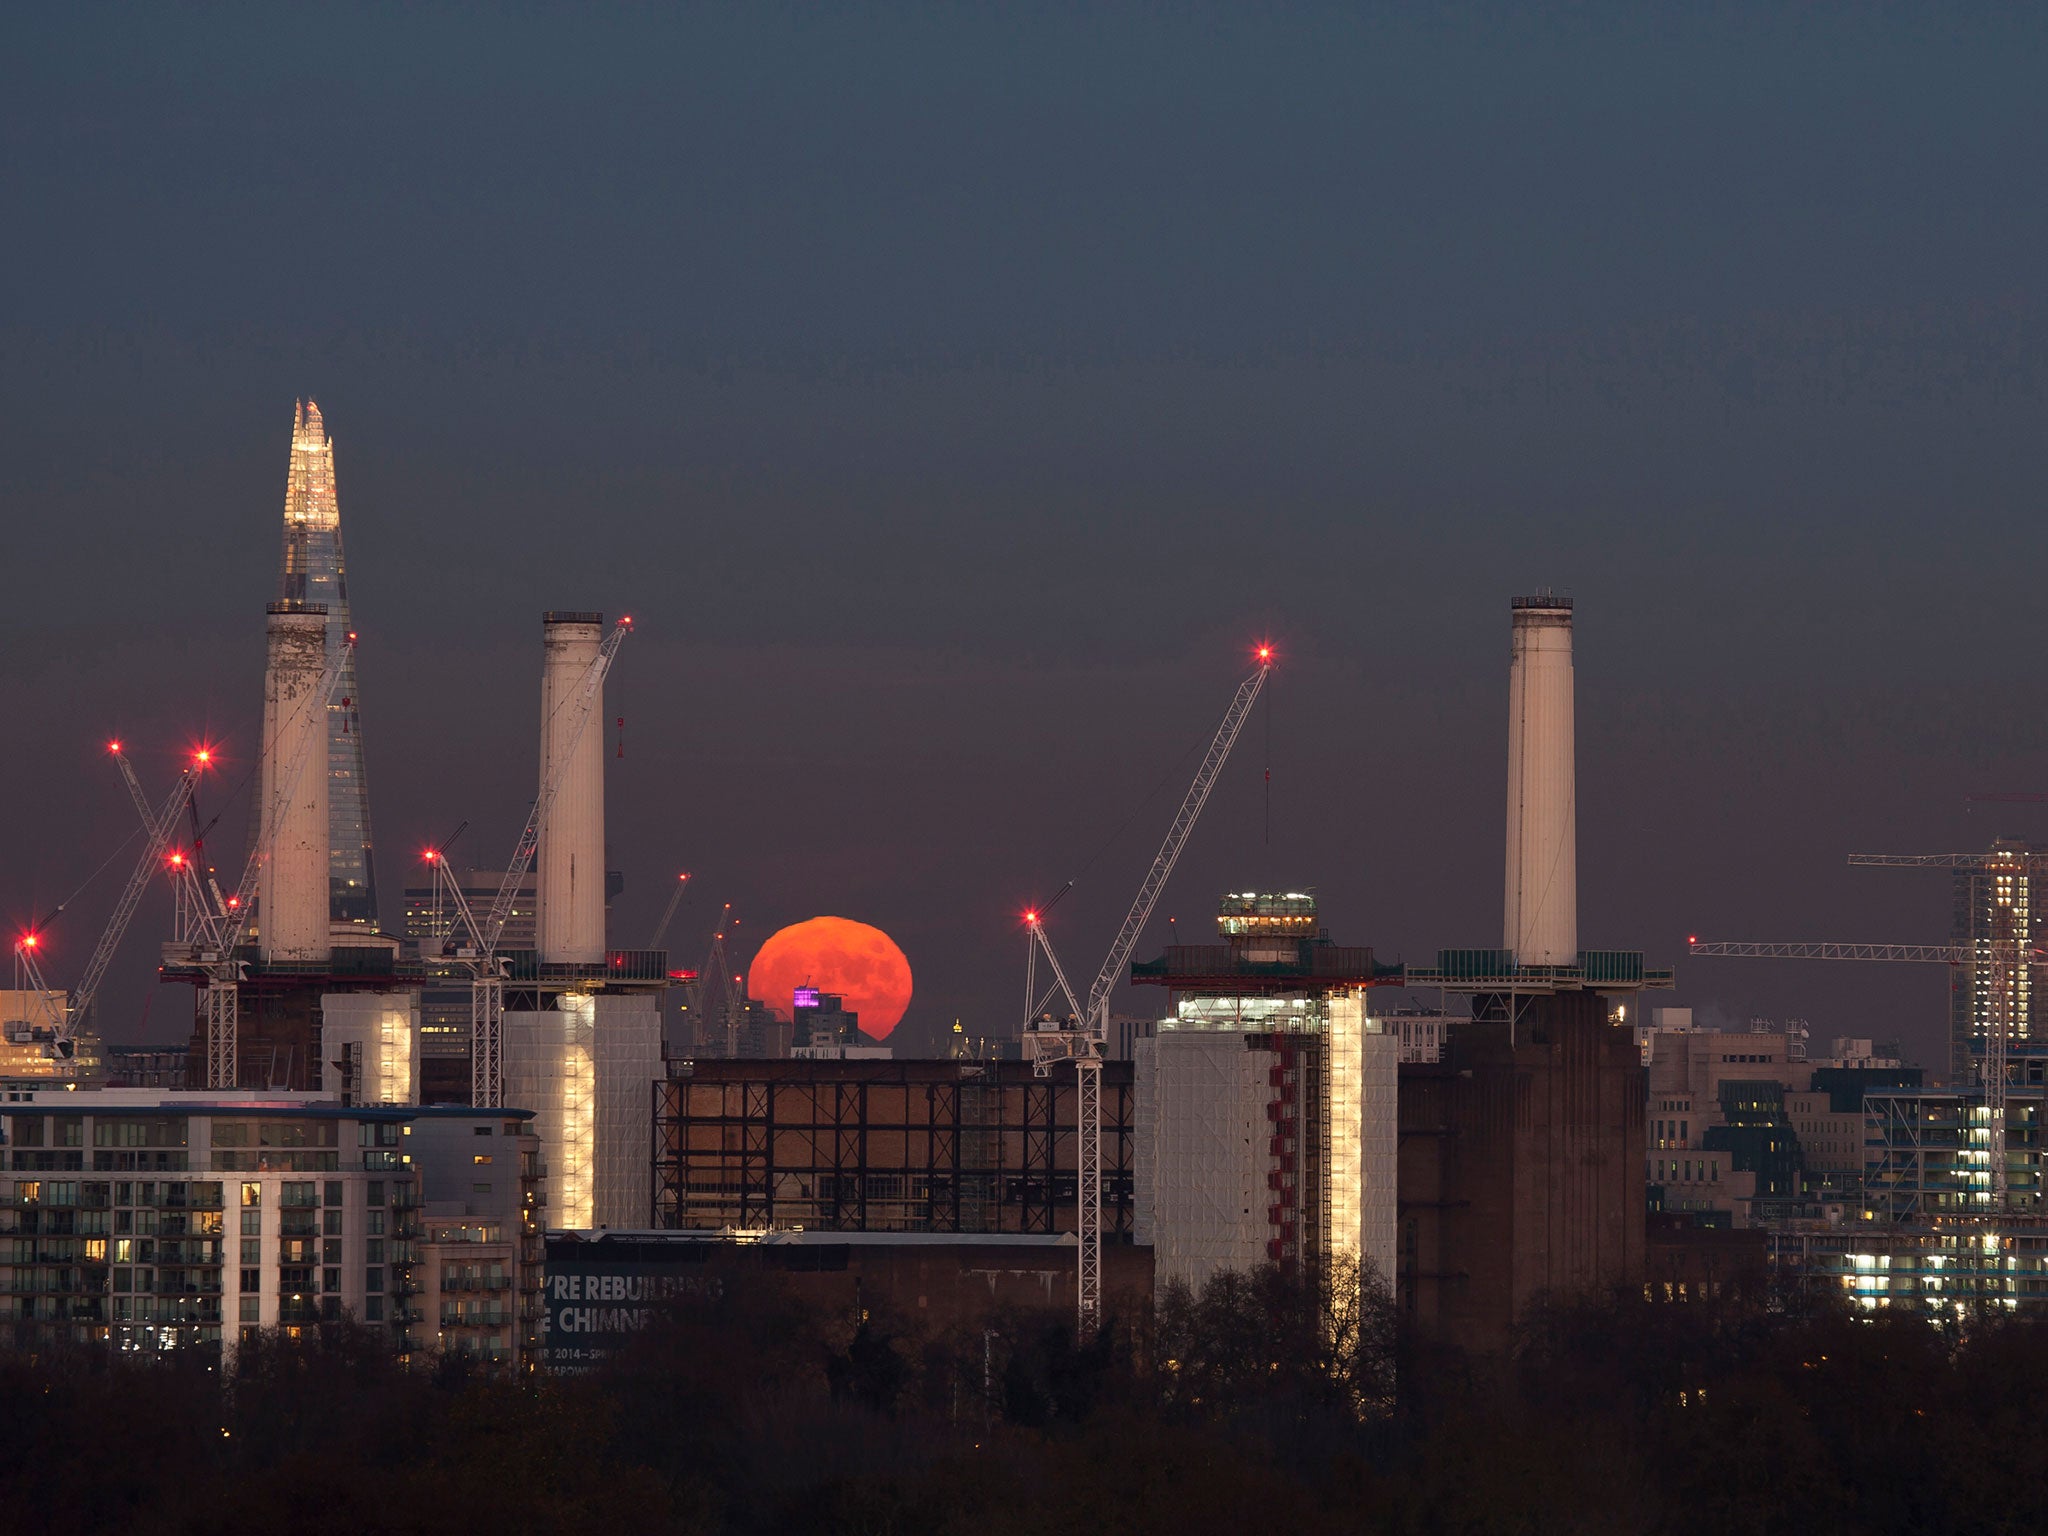 Stunning images from the photographer James Burns showed London illuminated by a seemingly huge full moon.